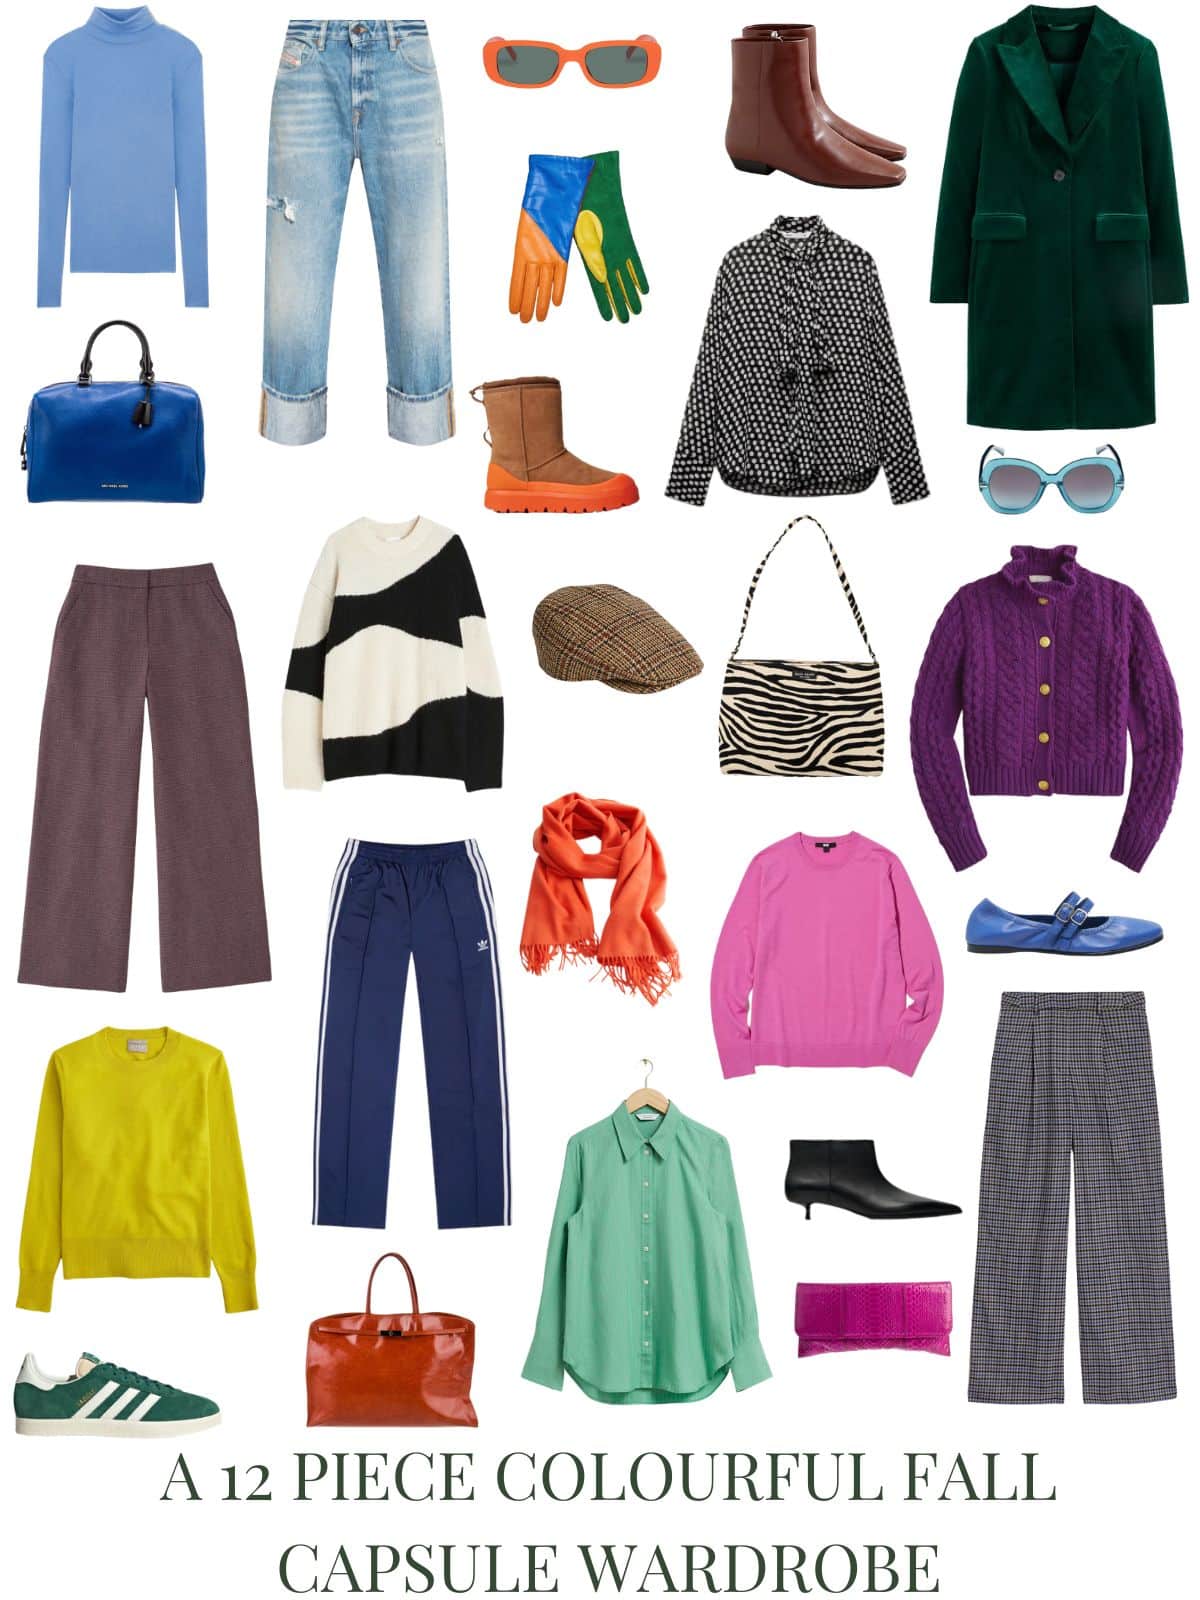 A white background with 12 pieces and accessories for A 12 Piece Colourful Fall Capsule Wardrobe.